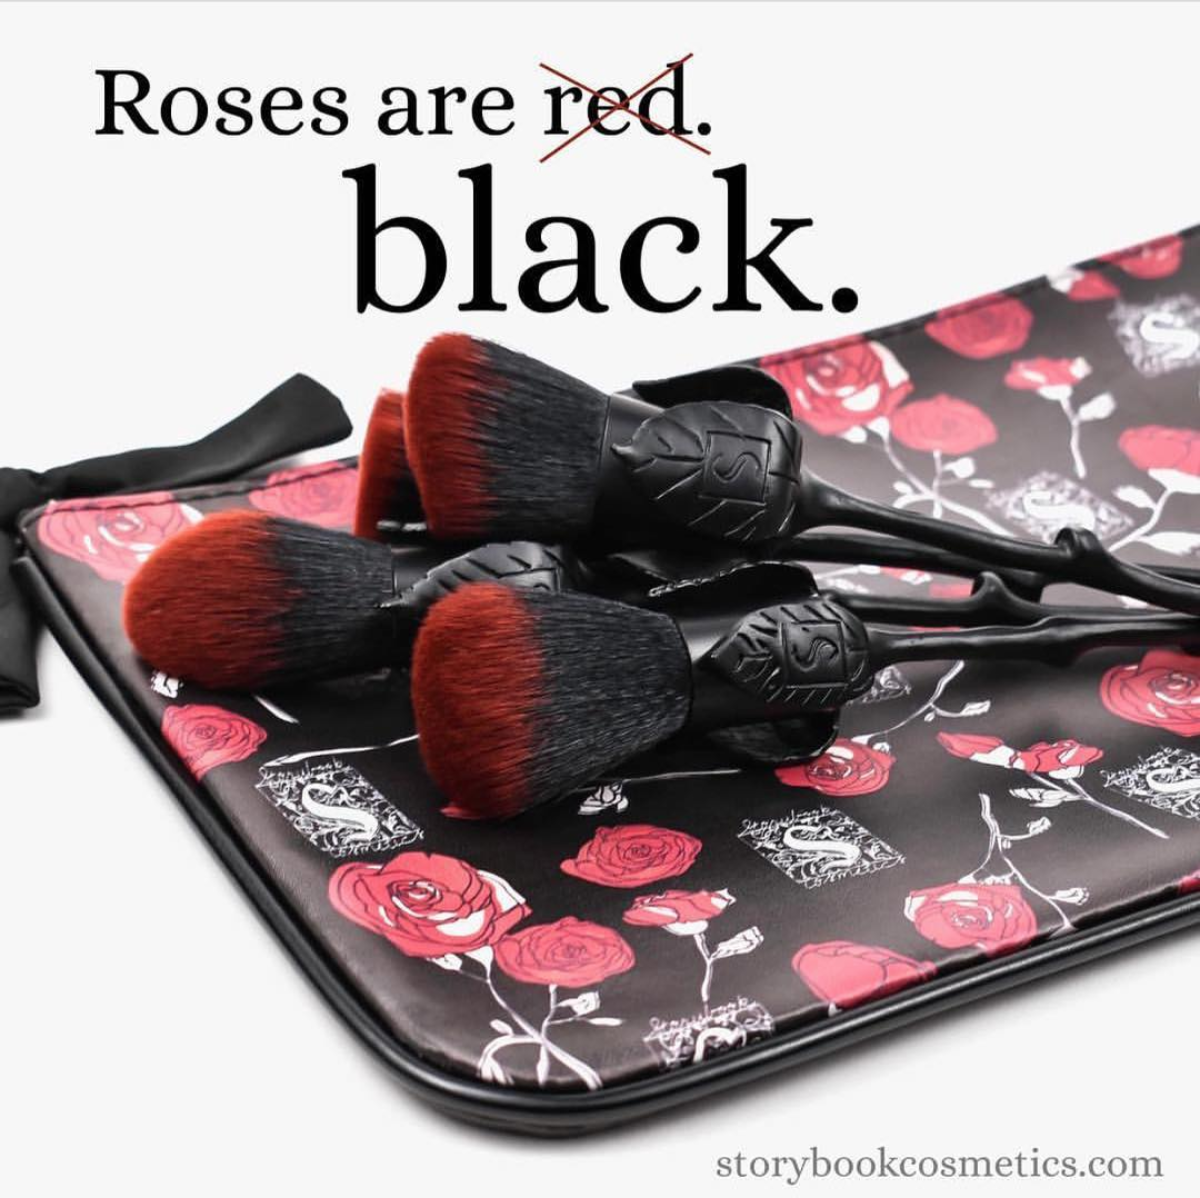 Storybook Cosmetics Black Roses Brush Set Roses Are Black Collection